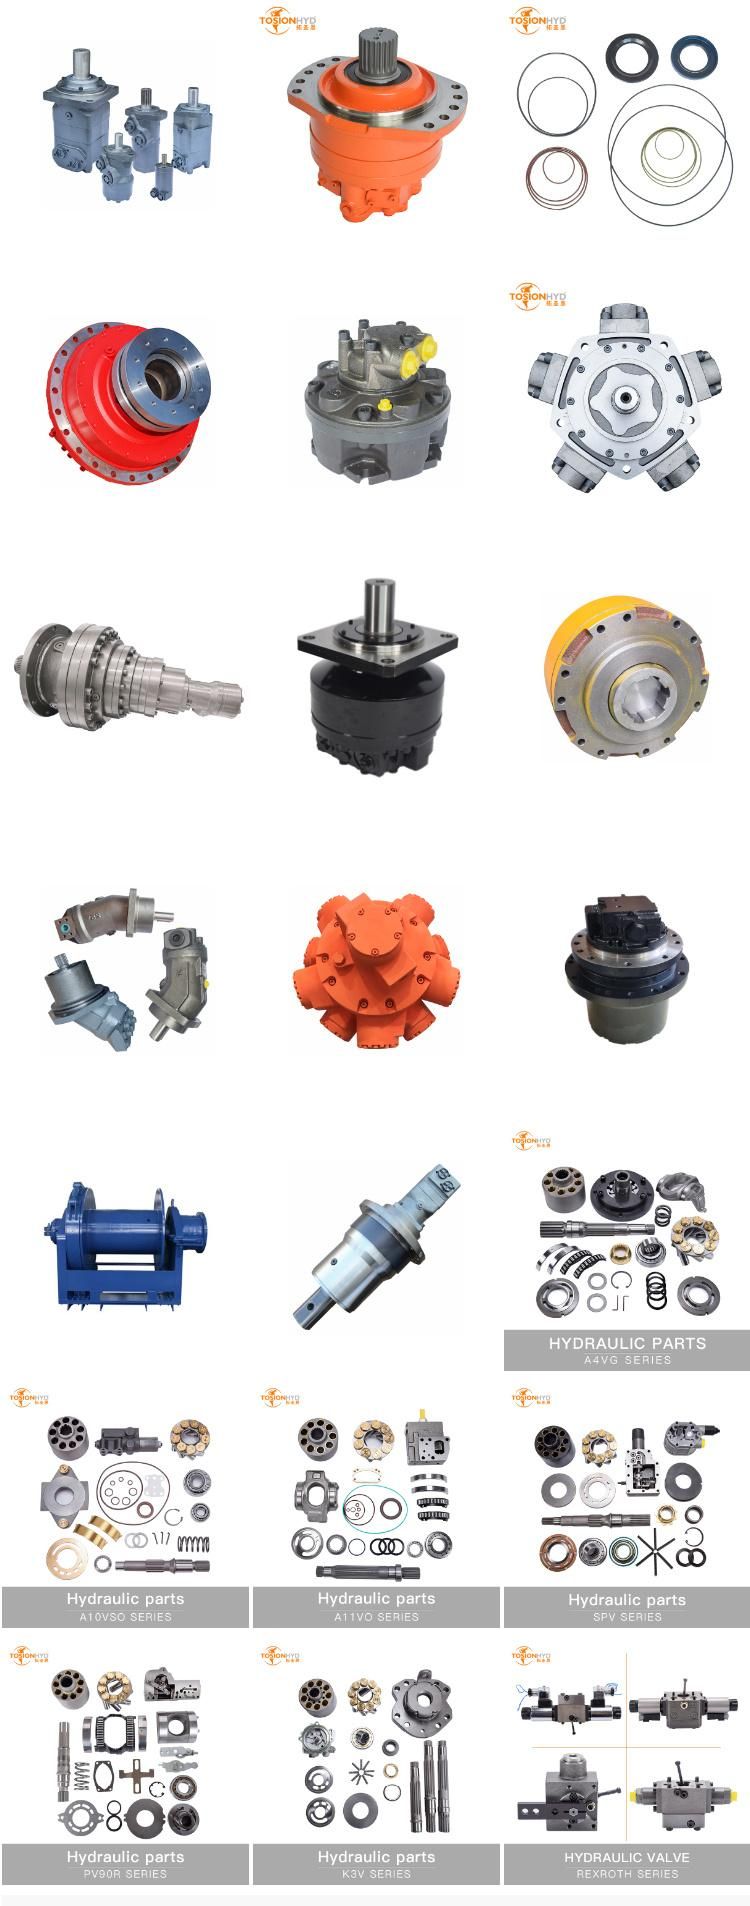 A7vo 500 Hydraulic Pump Parts with Rexroth Spare Repair Kits